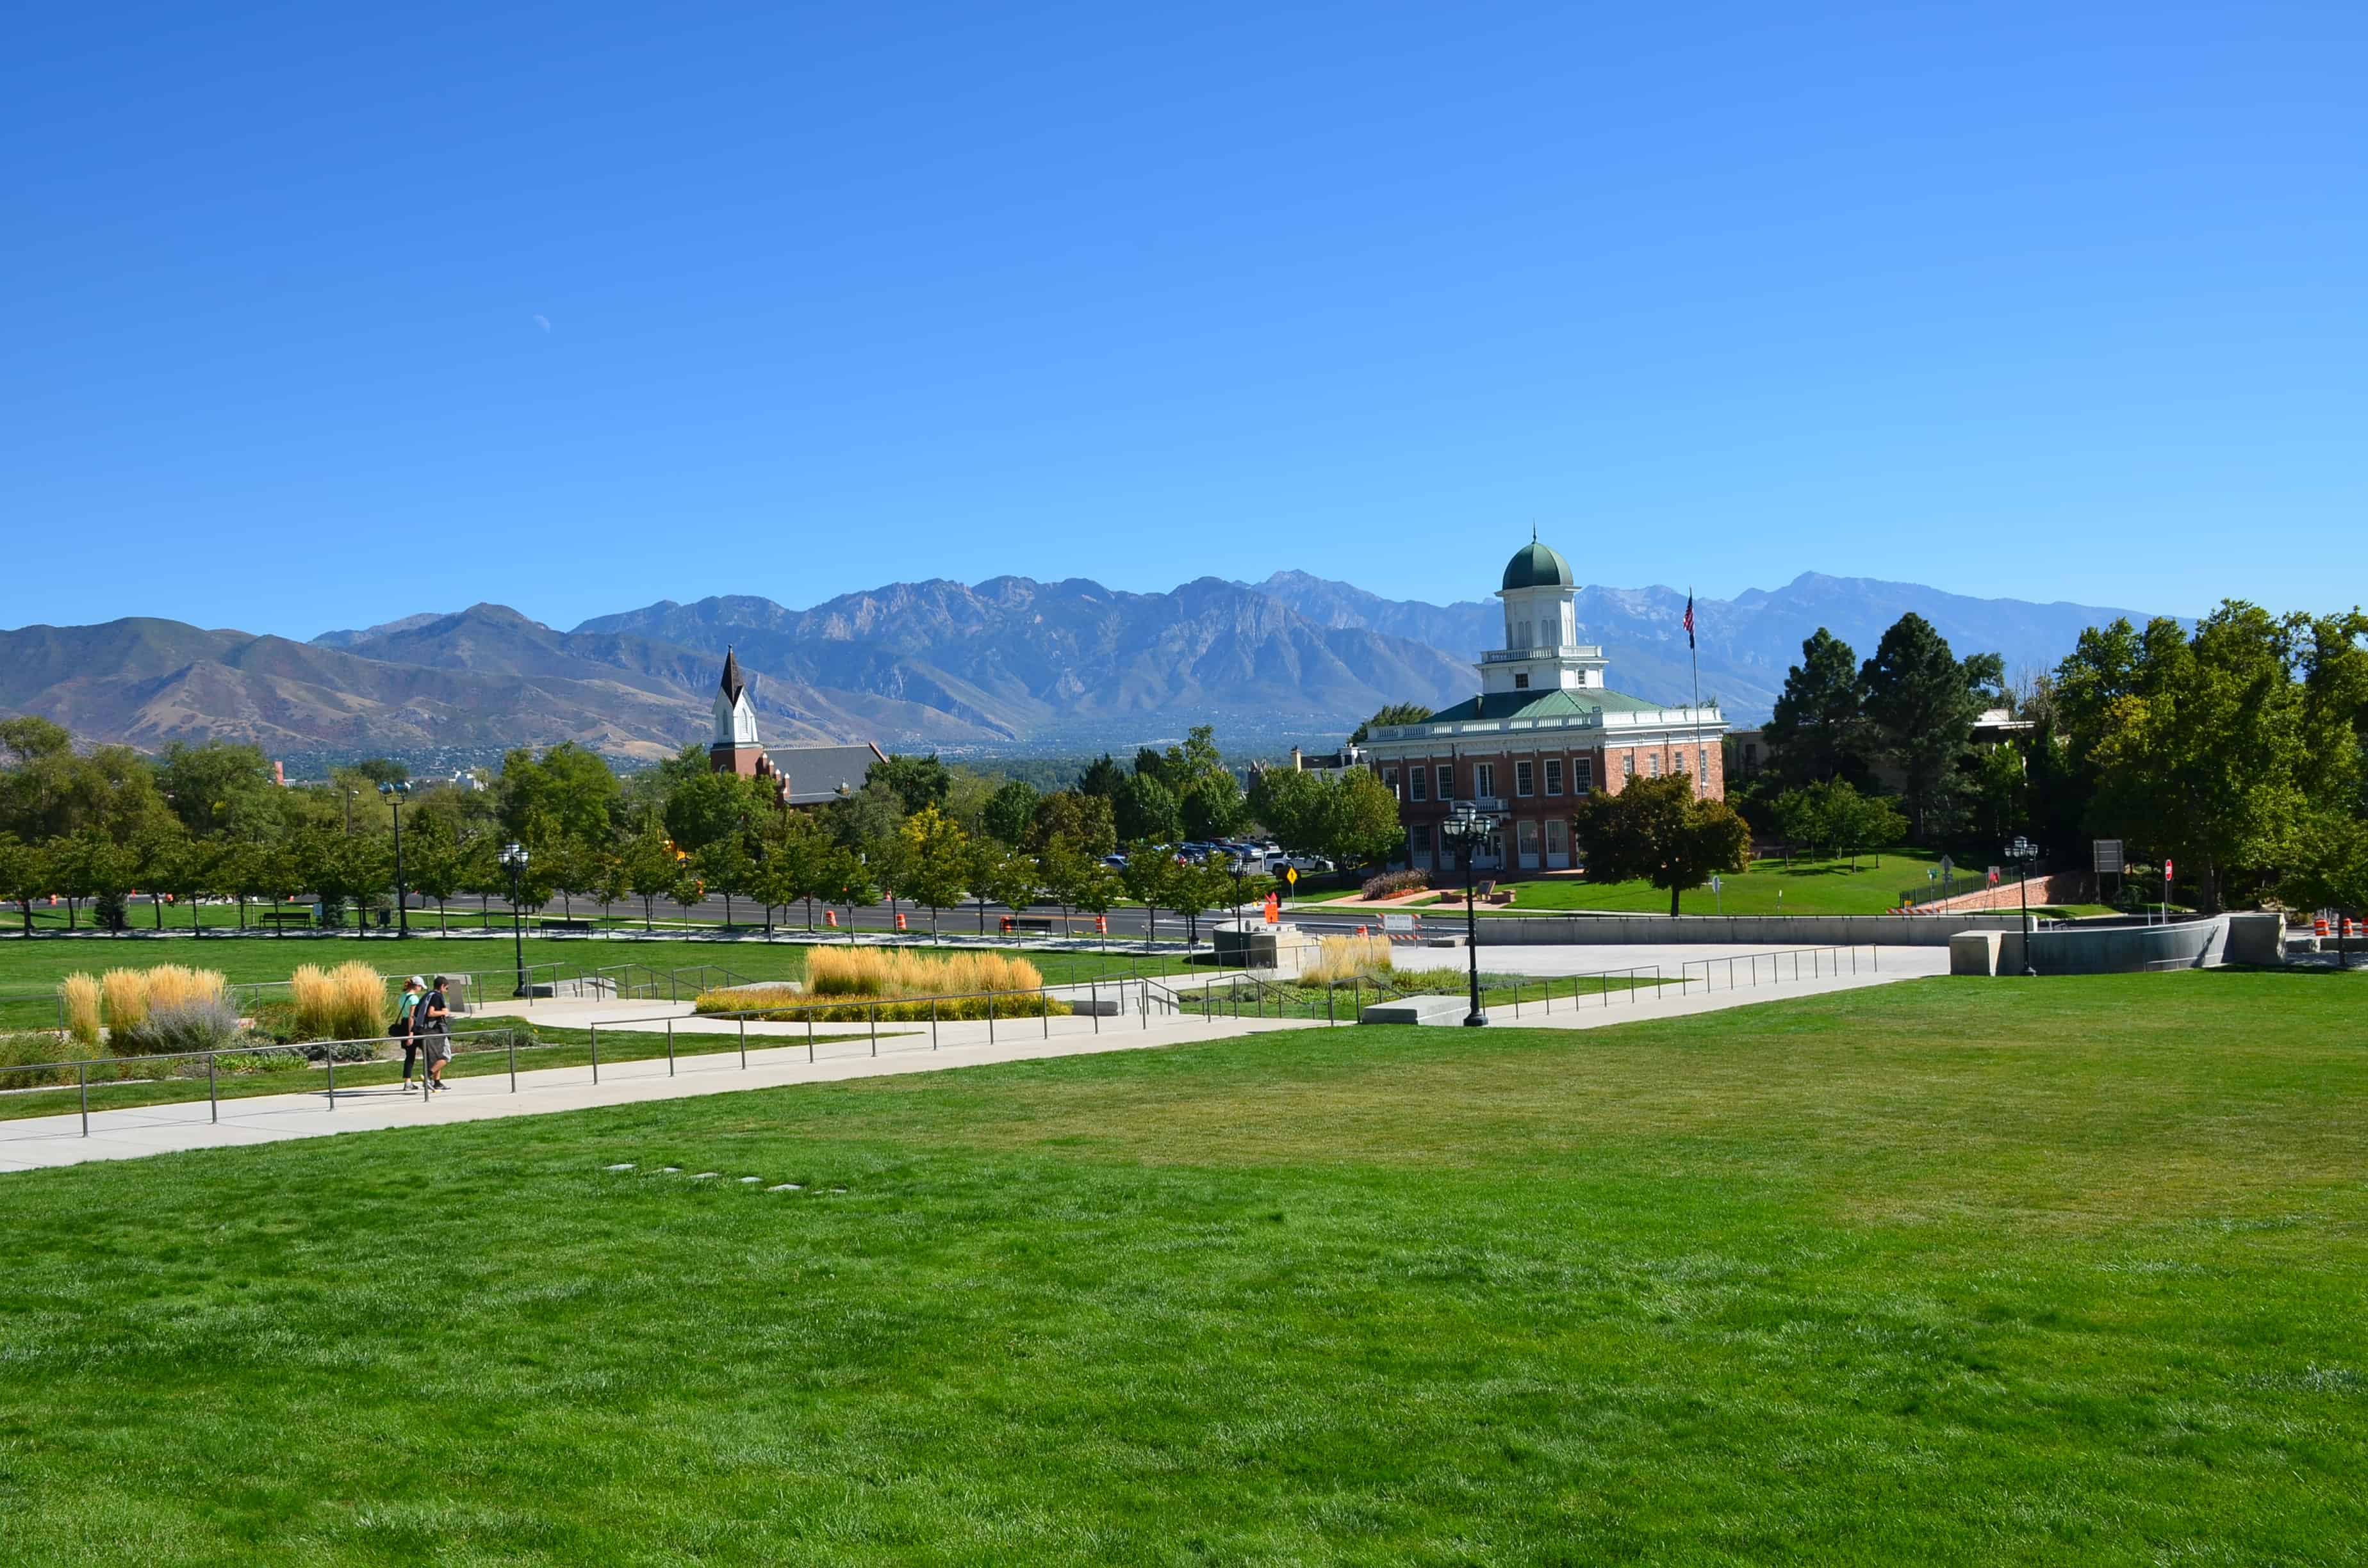 View of Council Hall at the Utah State Capitol in Salt Lake City